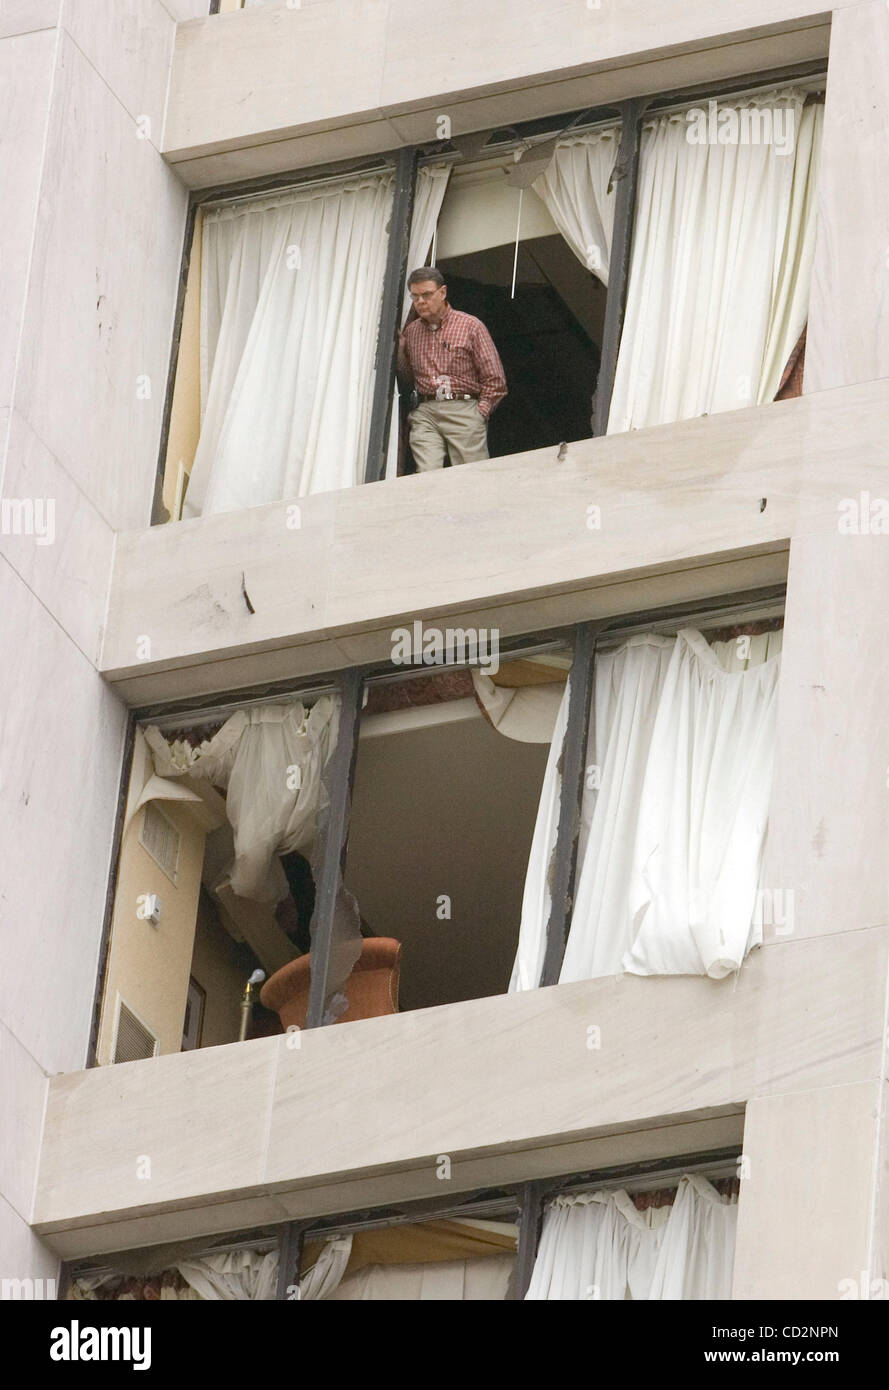 A guest at the Omni Hotel at the CNN Center peers out the shattered window of his guest room after an apparent tornado ripped through the downtown district in Atlanta, Georgia, on Saturday, March 15, 2008. State officials have put the damage estimates at least $150 million.(Credit Image: © Erik Less Stock Photo